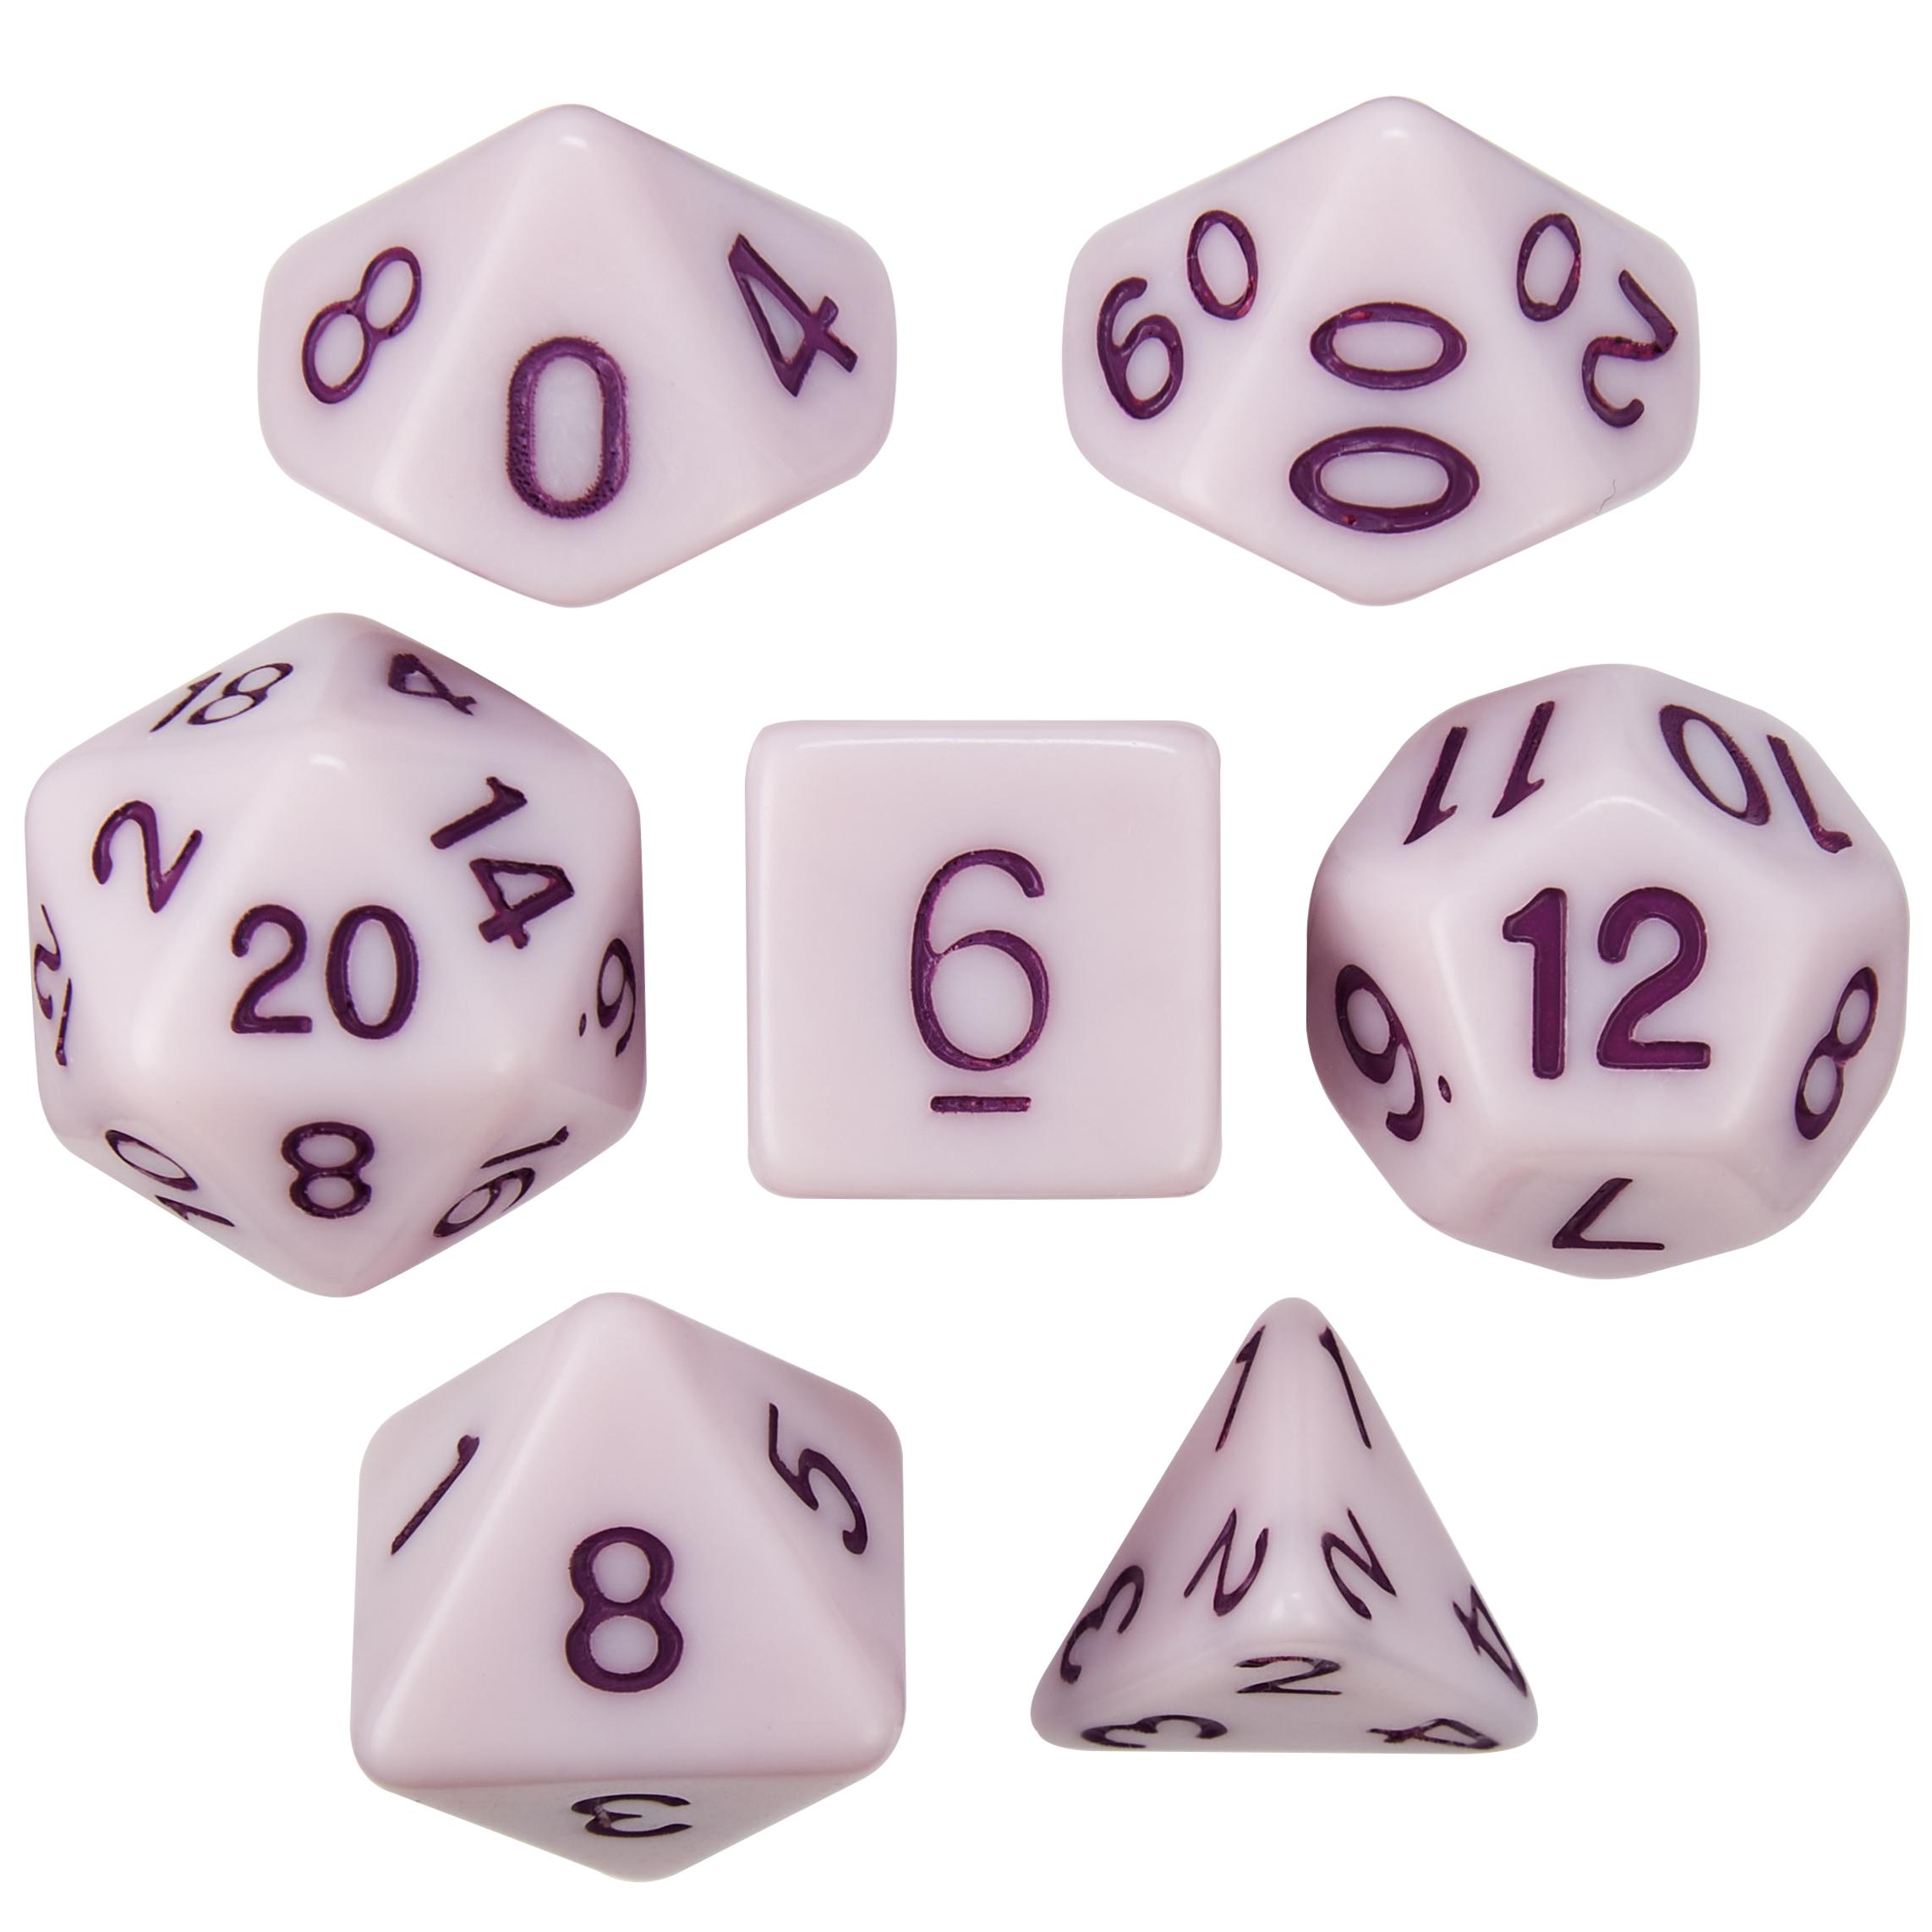 Set of 7 Dice - Nightshade Extract - Solid Purple with Purple Paint